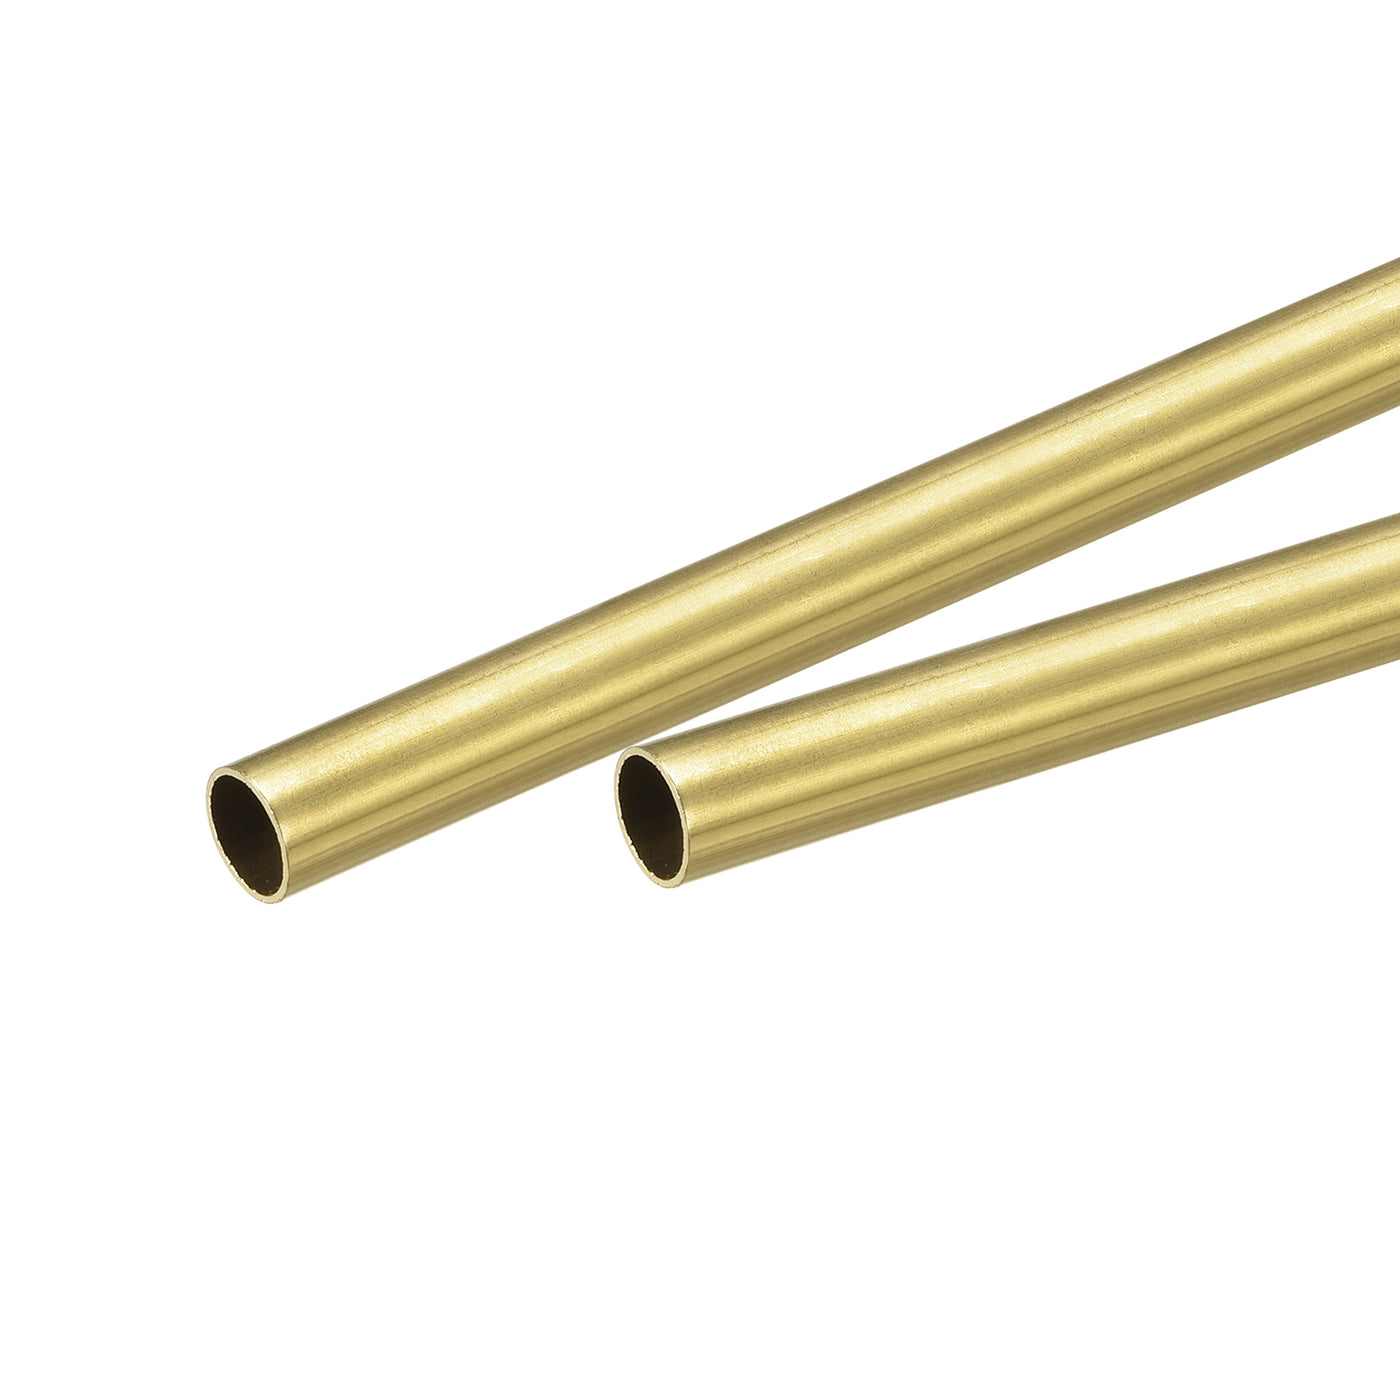 Uxcell Uxcell Brass Round Tube 5mm OD 1mm Wall Thickness 200mm Length Pipe Tubing 2 Pcs